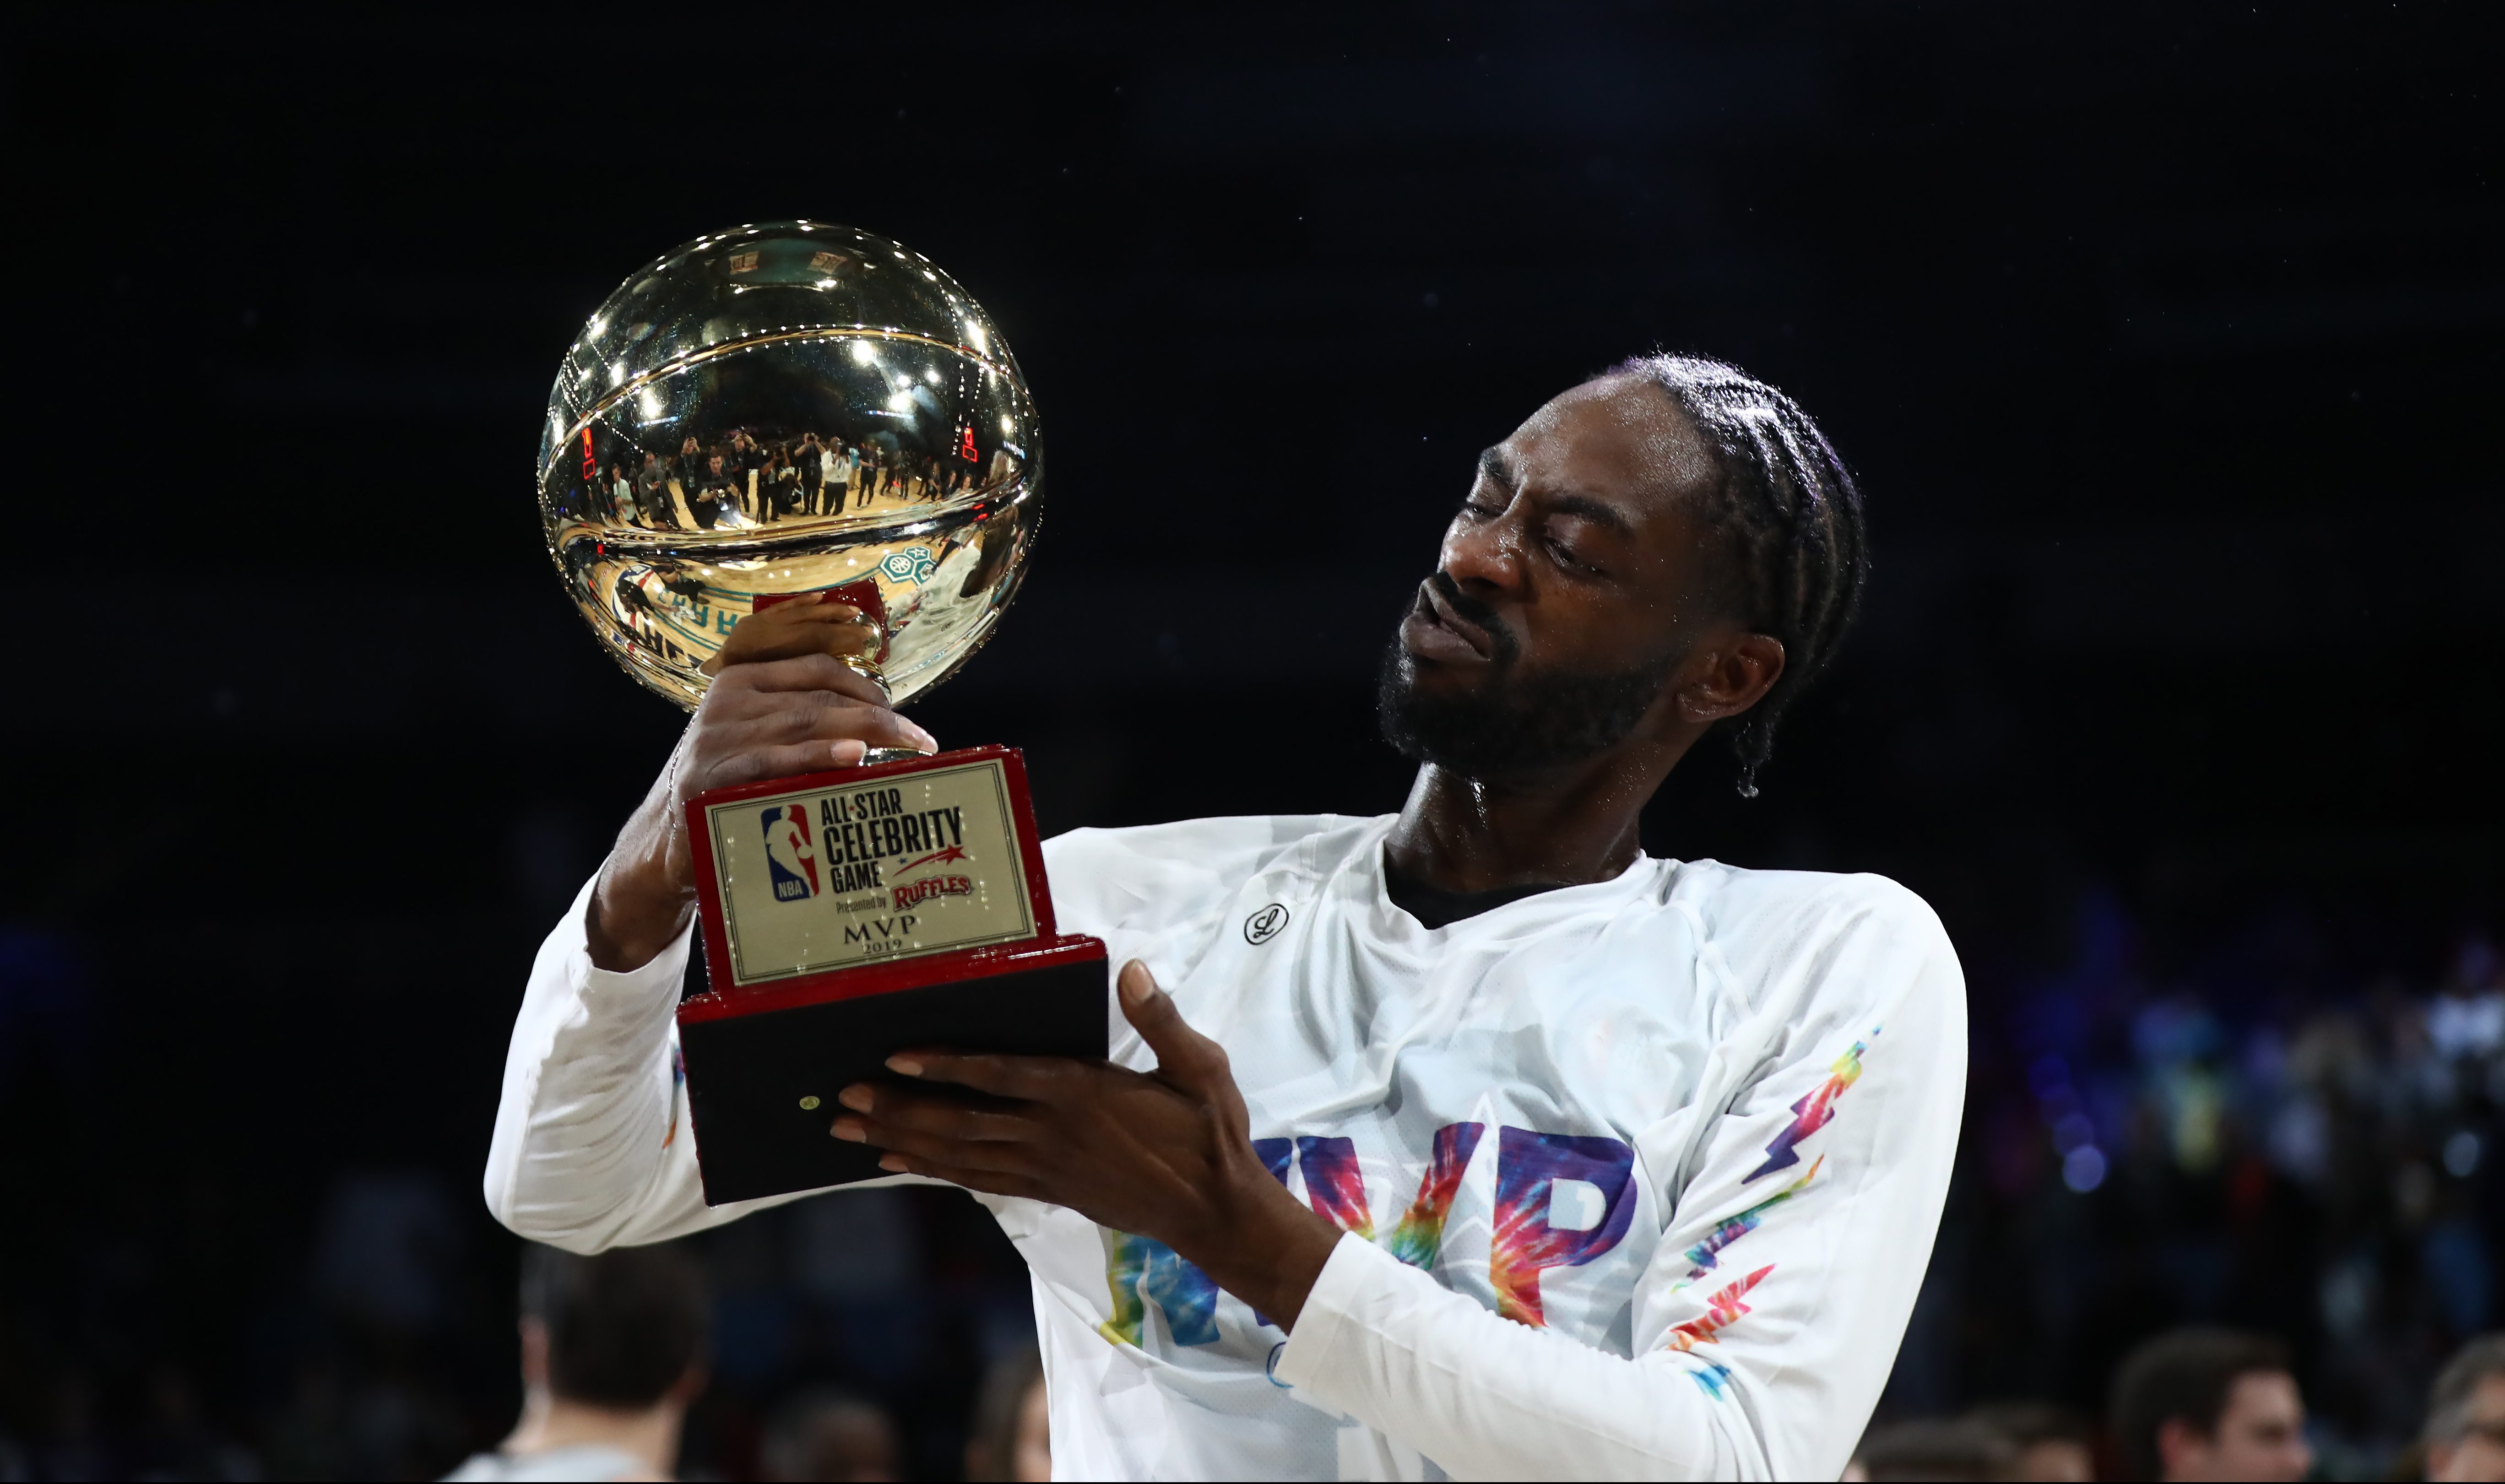 How to Watch NBA Celebrity Game 2020 Online Without Cable